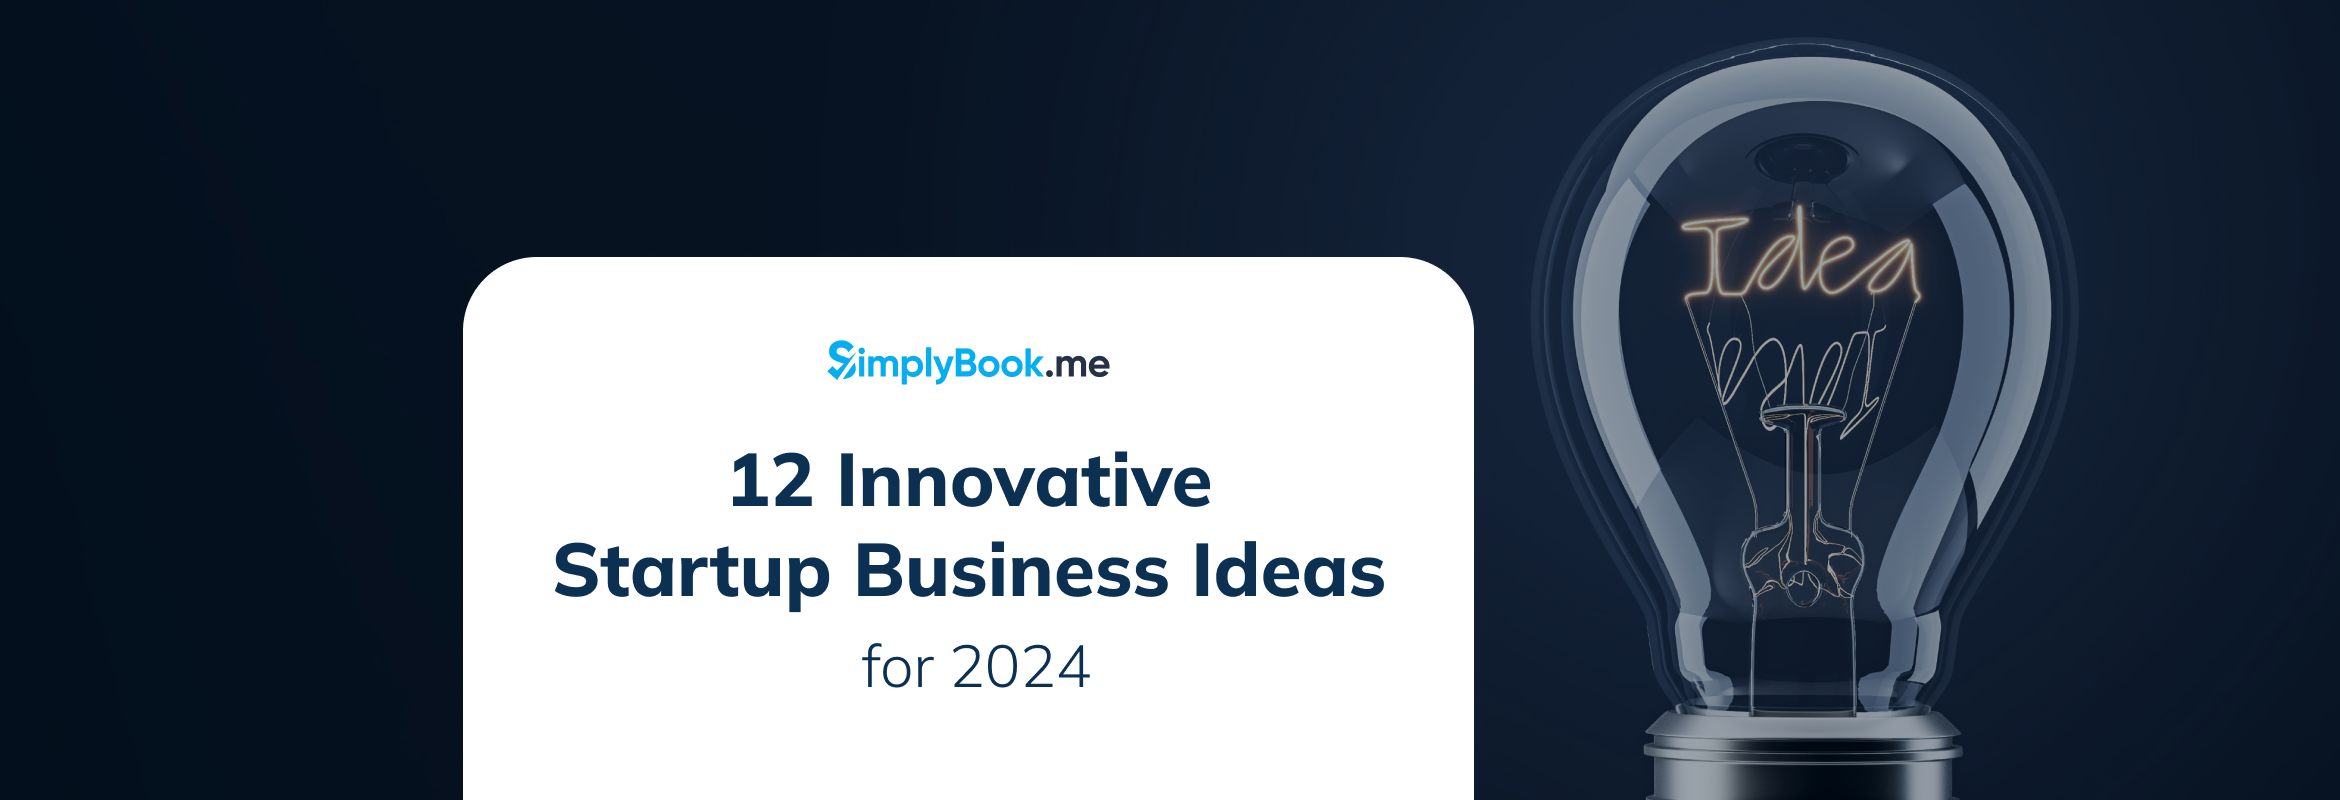 Simplybook.me business ideas 2024